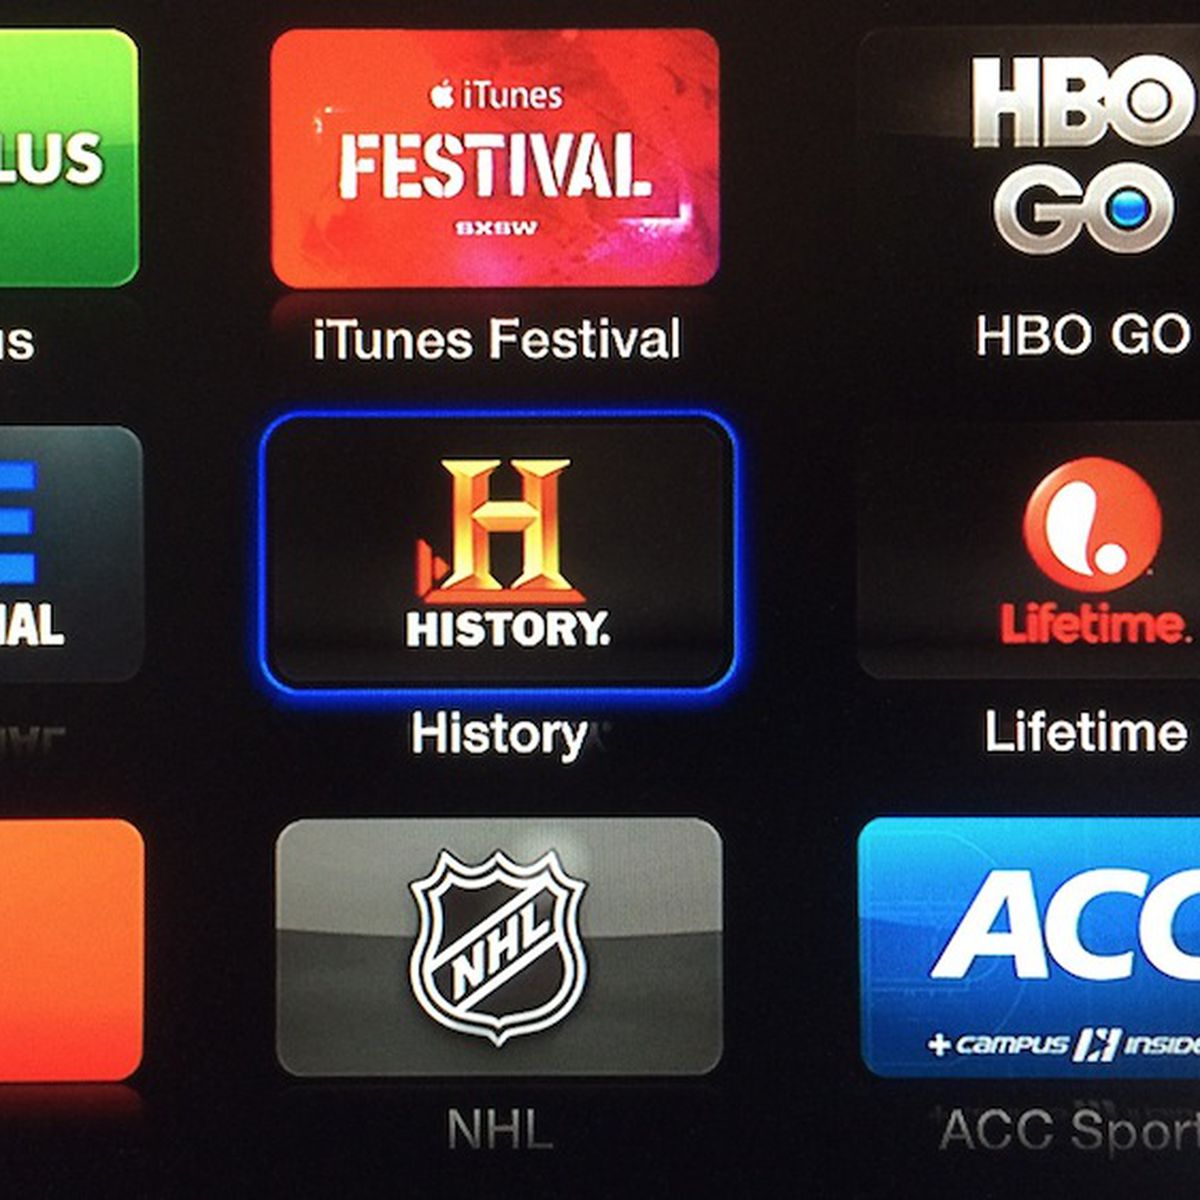 Hejse morfin æstetisk A&E, History Channel, and Lifetime Channels Added to Apple TV - MacRumors